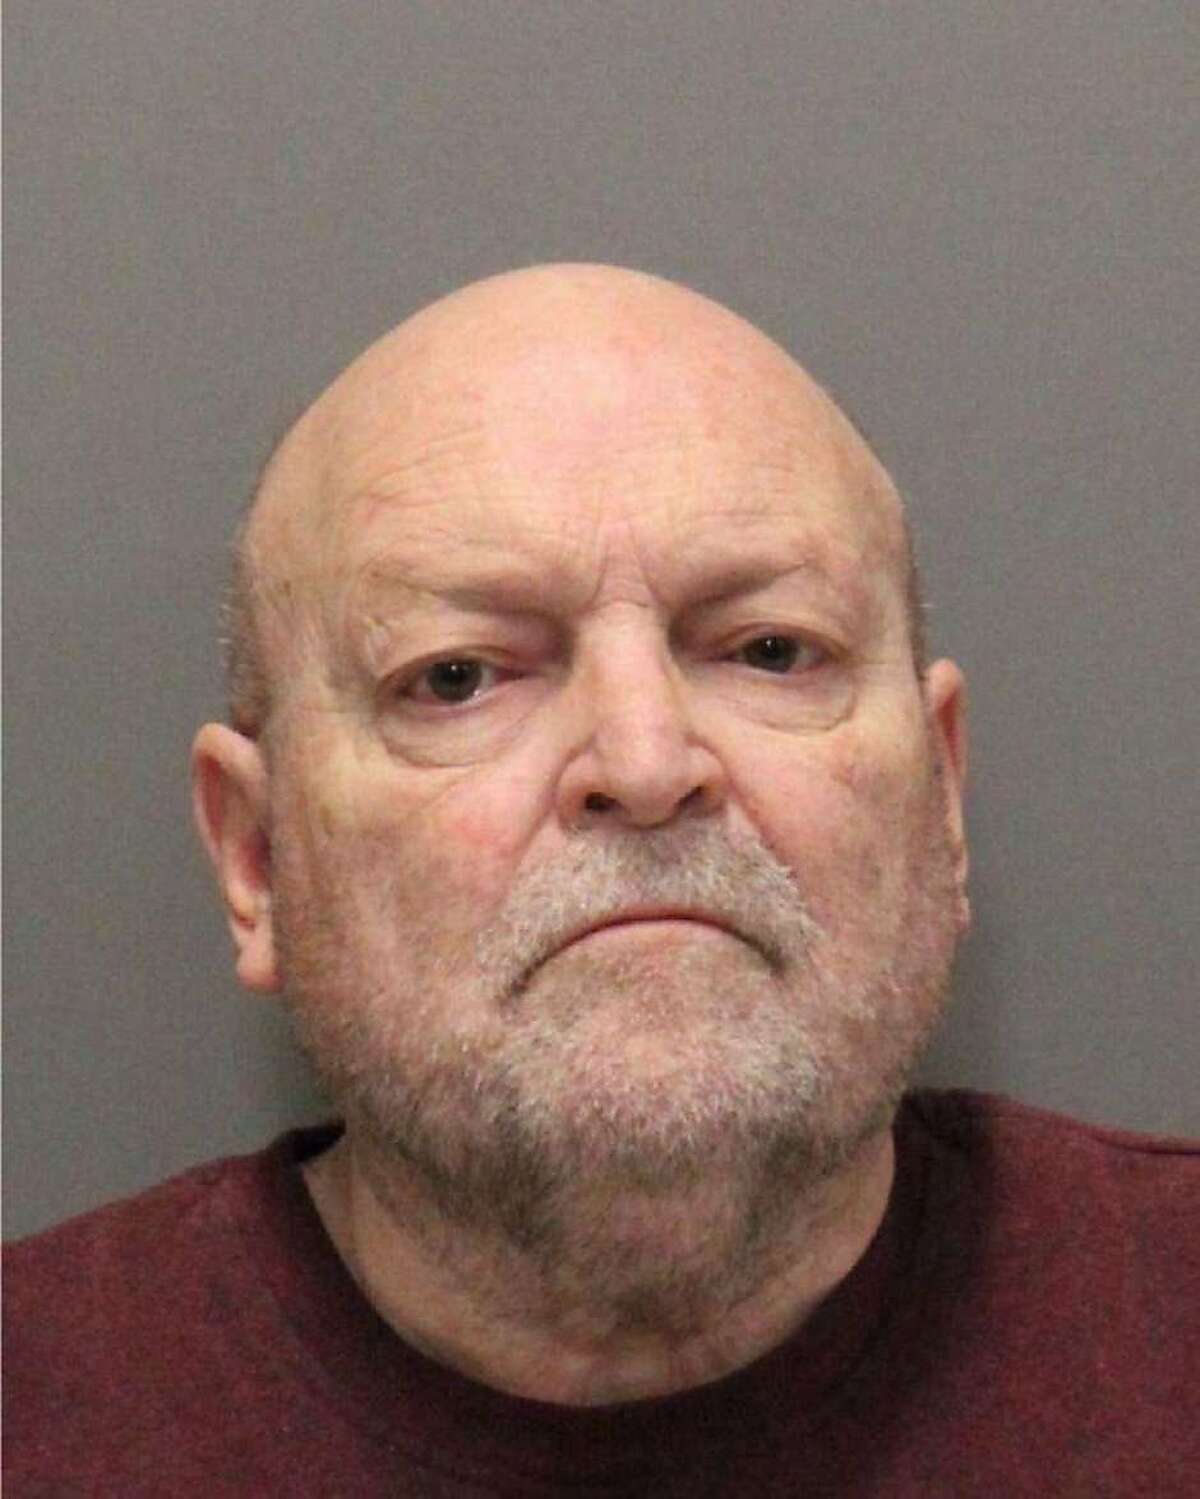 Murder suspect John  Arthur Getreu, a 74-year-old former security guard already in jail in connection with the strangulation death of a young woman four decades ago,  was charged on Thursday with the strangulation killing of a second  young woman in the 1970s